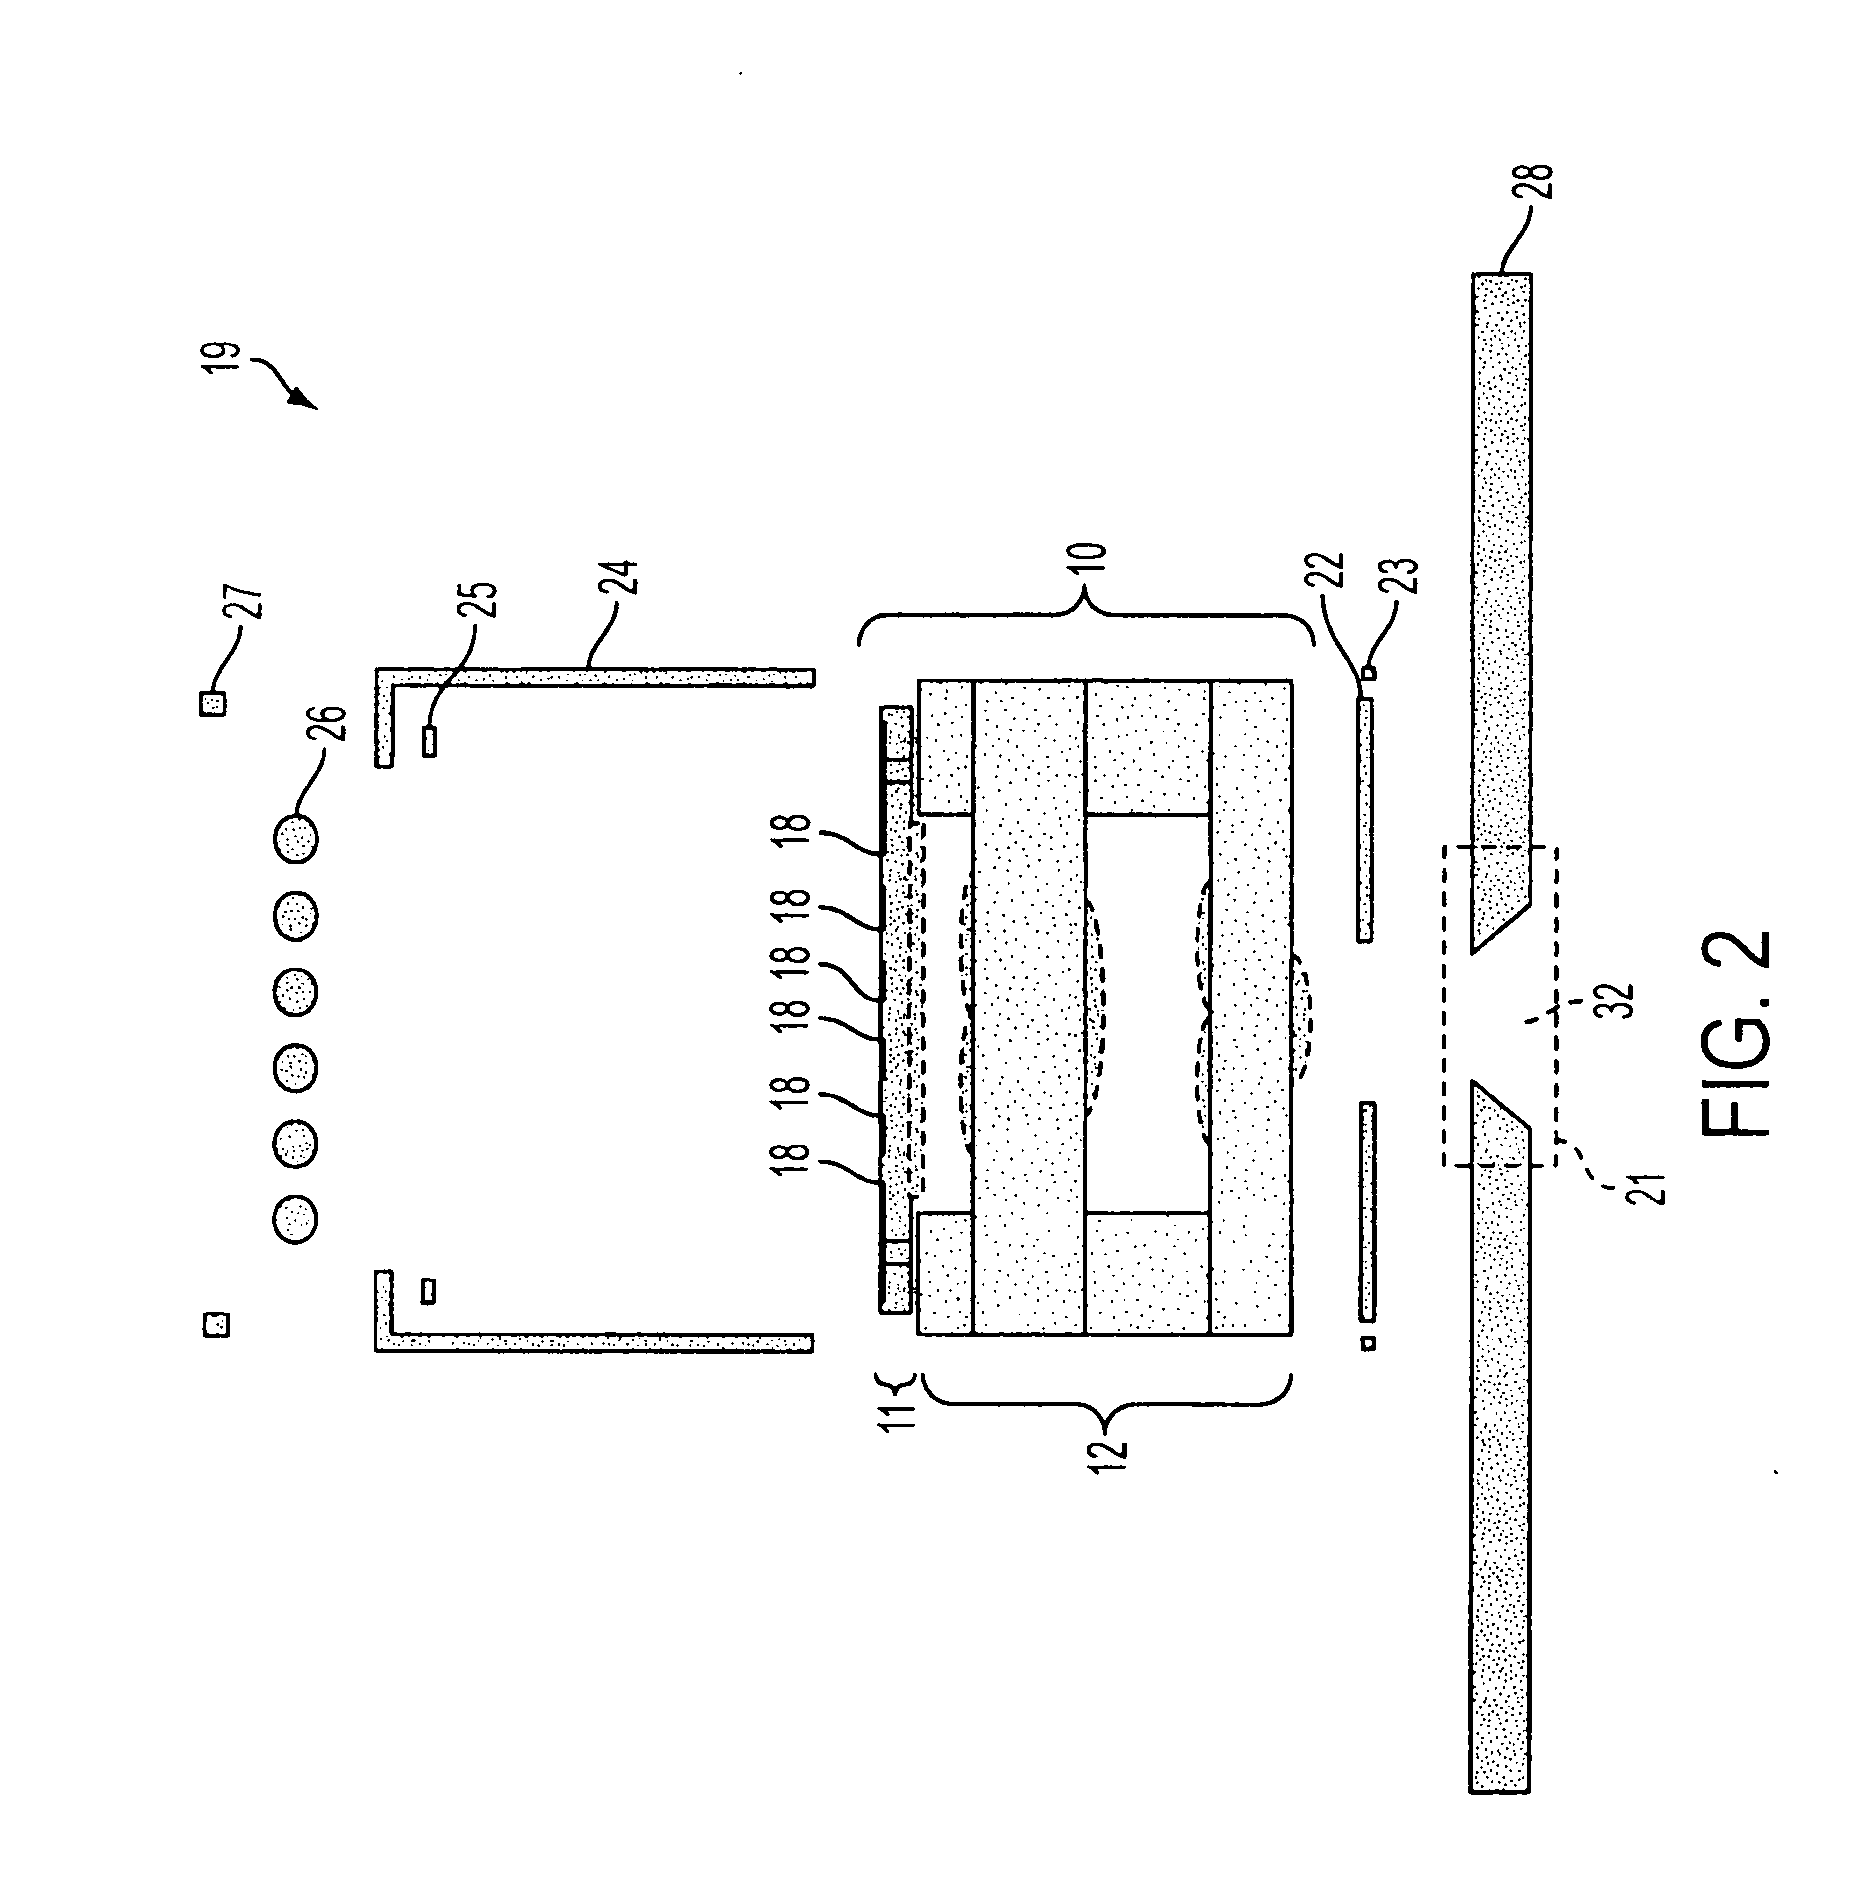 Imager wafer level module and method of fabrication and use